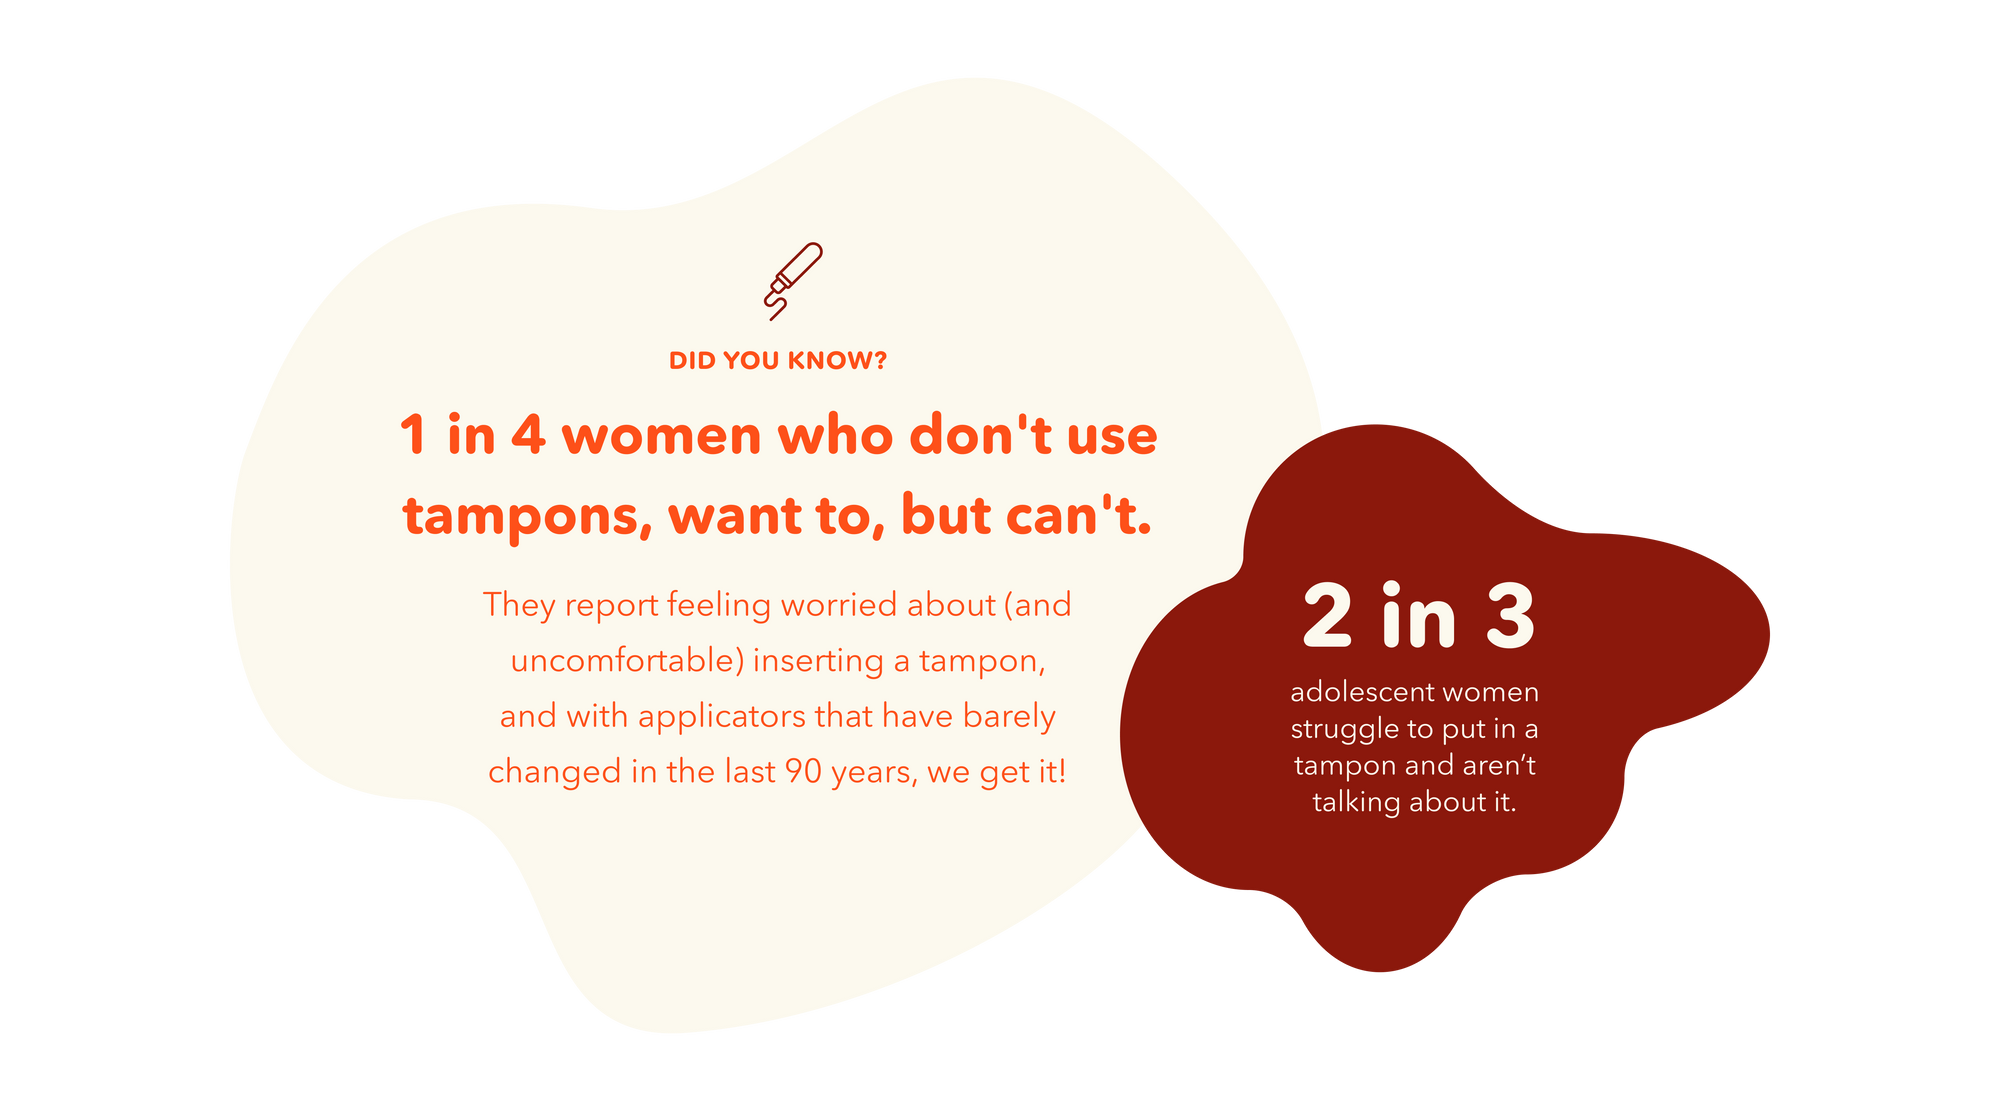 Facts about women's experiences with tampons.